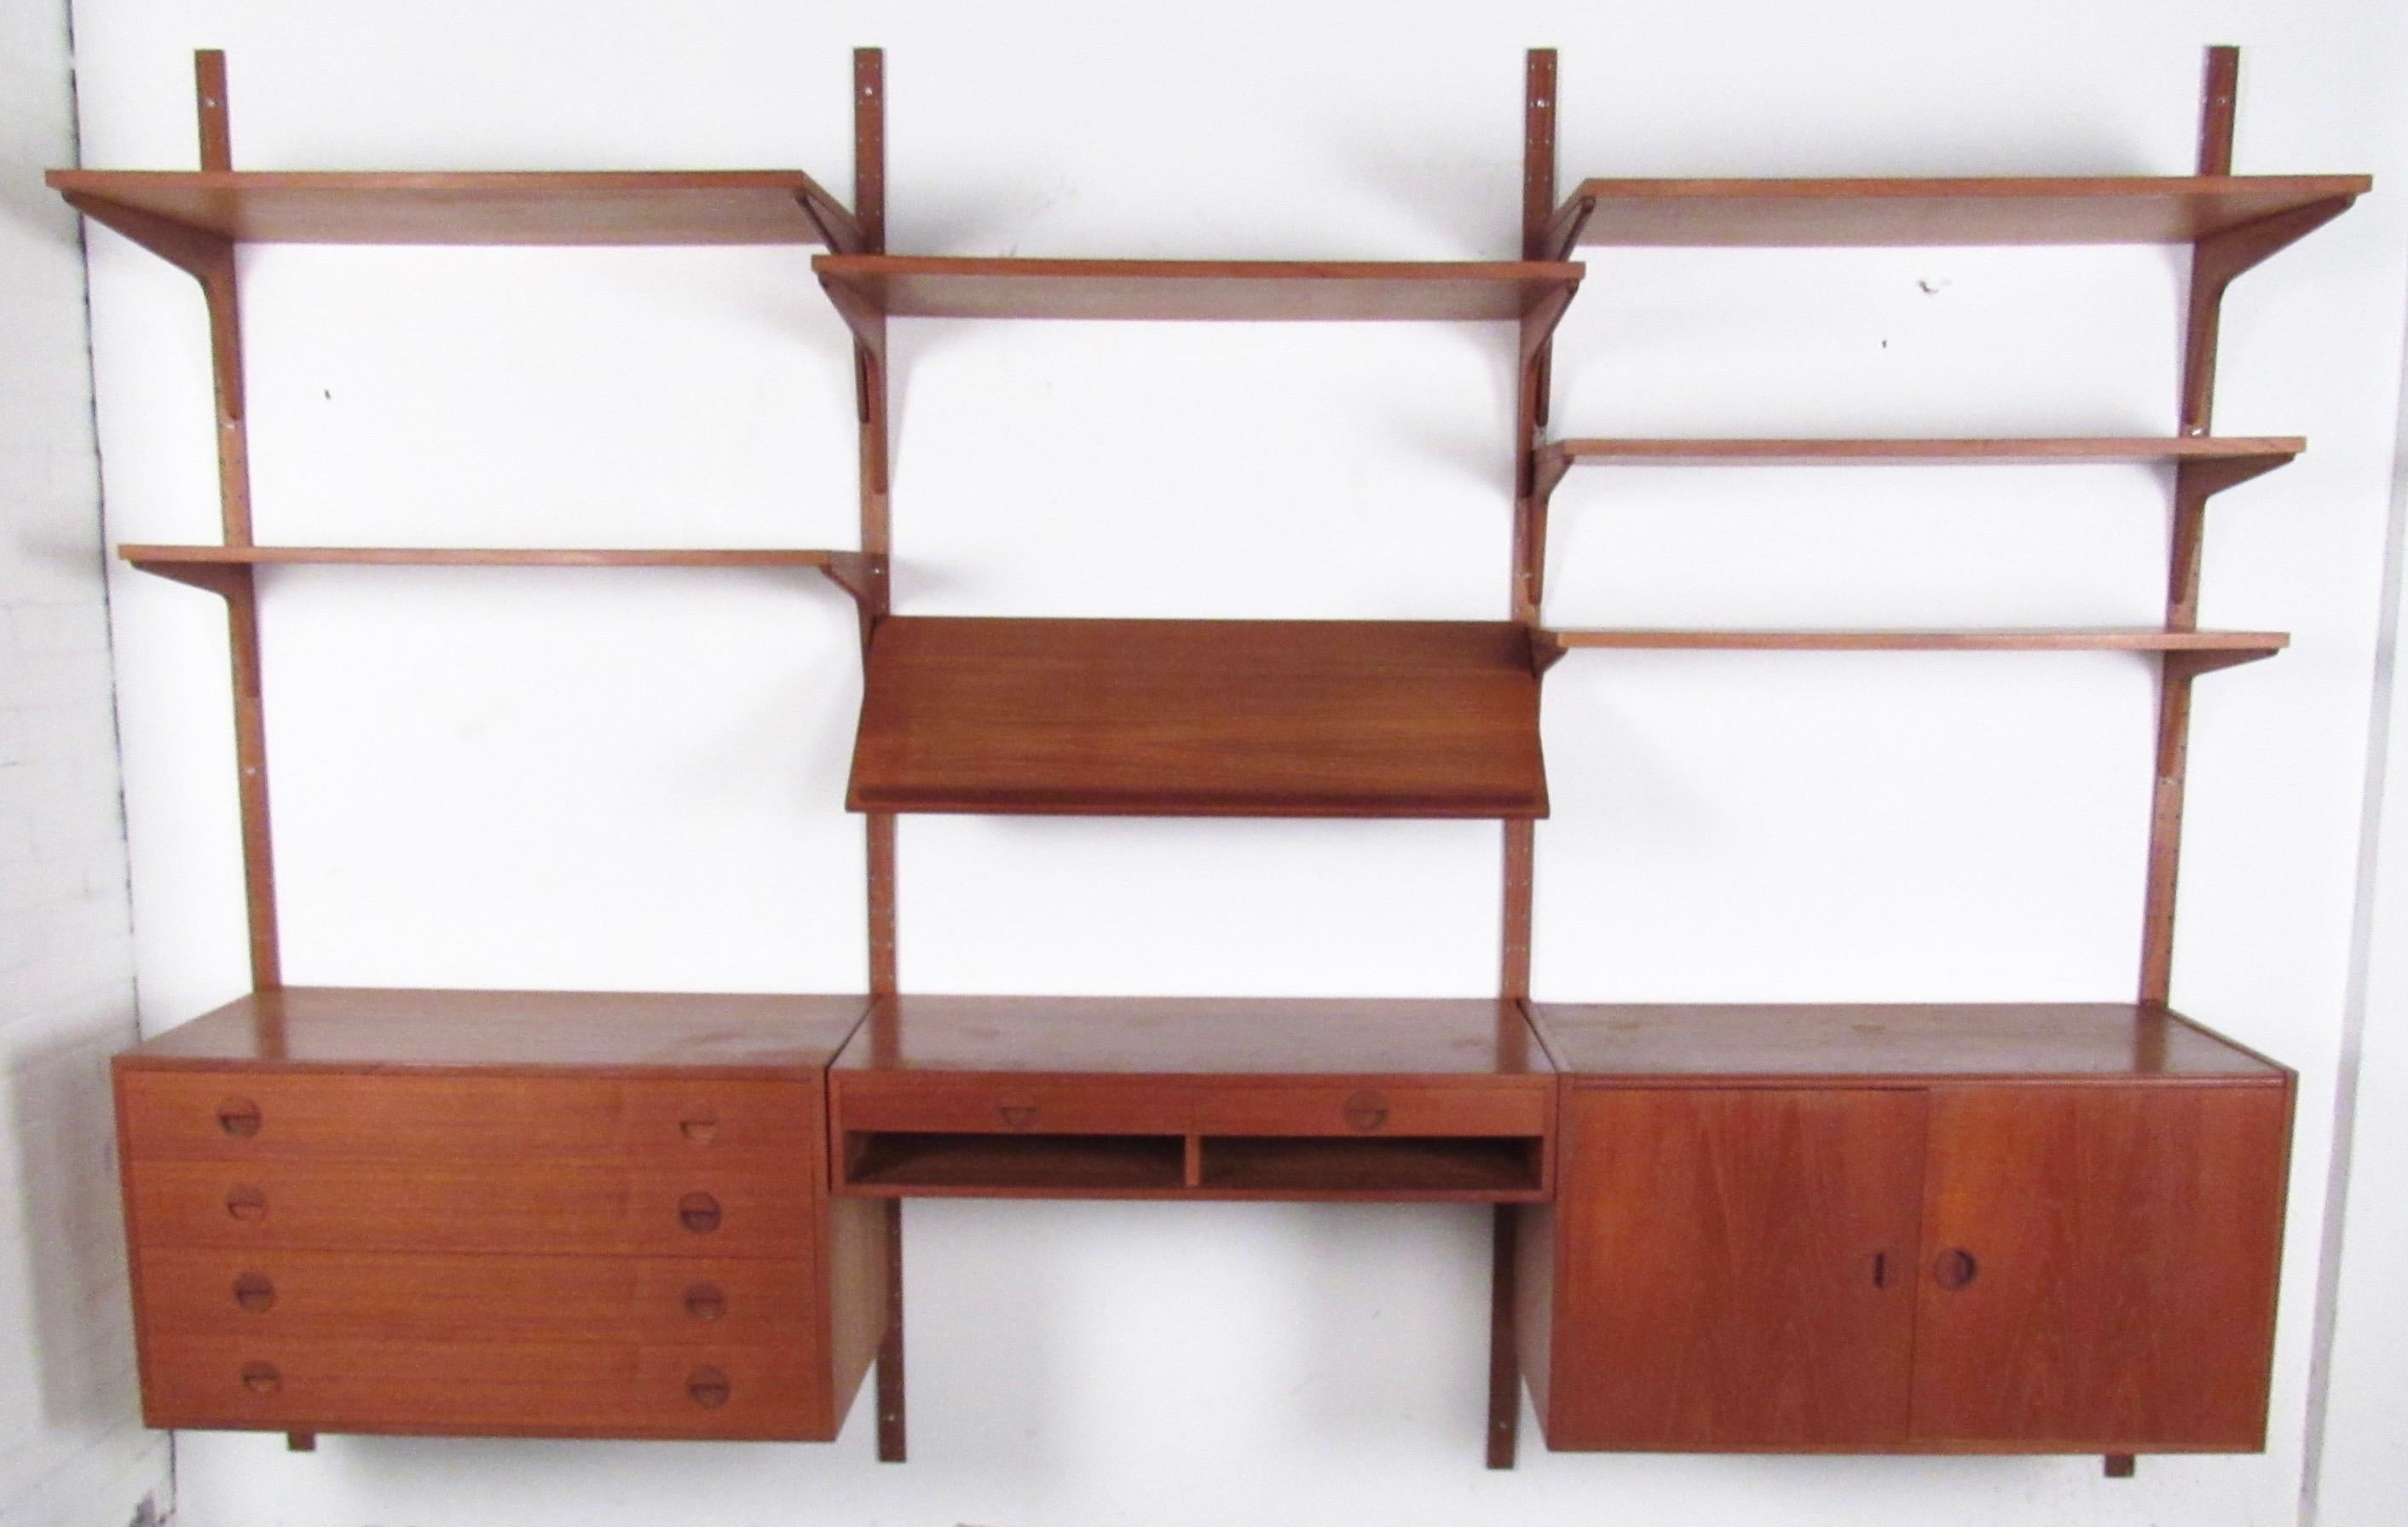 This stylish modular wall unit features midcentury teak construction and is easily arranged for optimal storage and display in any setting. Poul Cadovius style, this vintage wall-mounted bookshelf includes space for shelf storage, record cabinet,